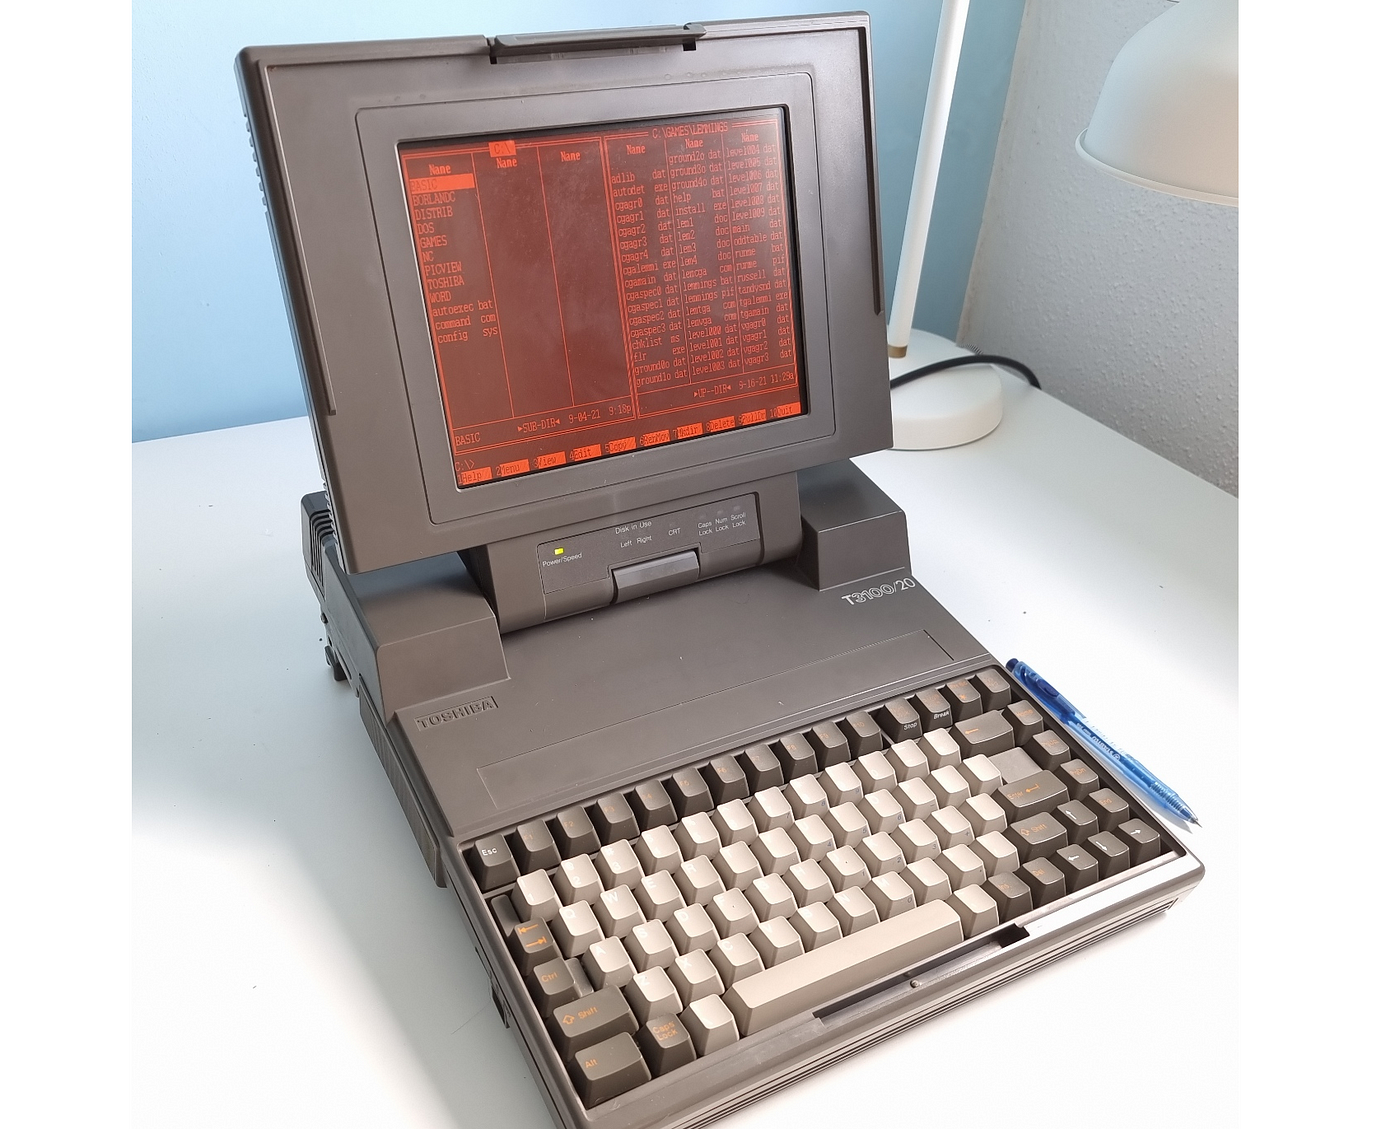 The 'Luggable' laptop